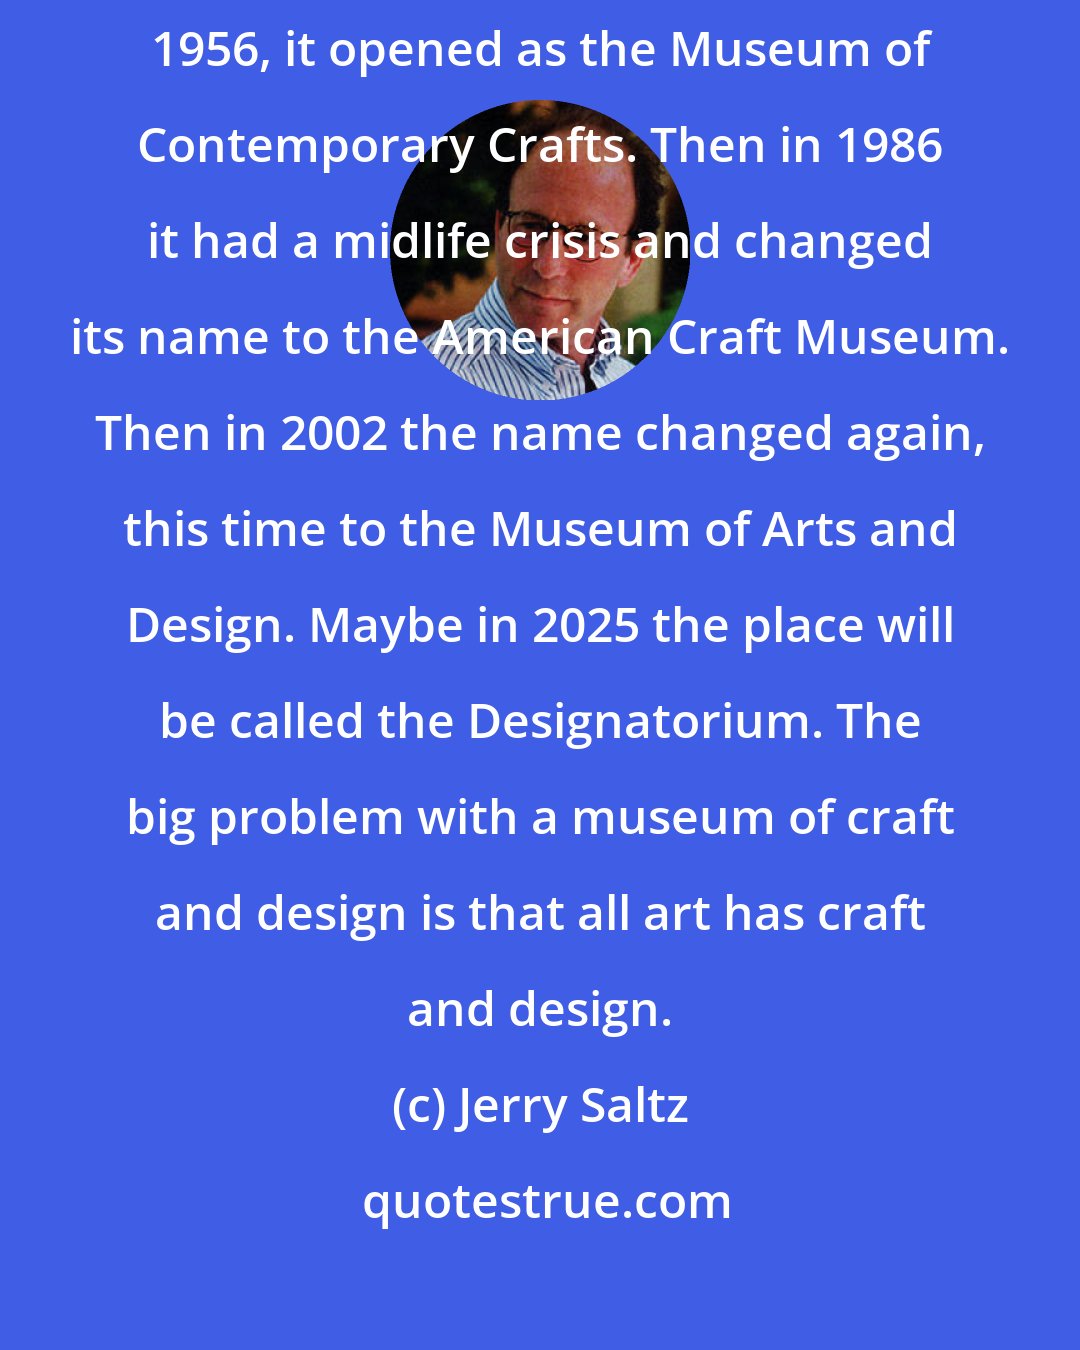 Jerry Saltz: The place has had a super-conflicted relationship to its mission. In 1956, it opened as the Museum of Contemporary Crafts. Then in 1986 it had a midlife crisis and changed its name to the American Craft Museum. Then in 2002 the name changed again, this time to the Museum of Arts and Design. Maybe in 2025 the place will be called the Designatorium. The big problem with a museum of craft and design is that all art has craft and design.